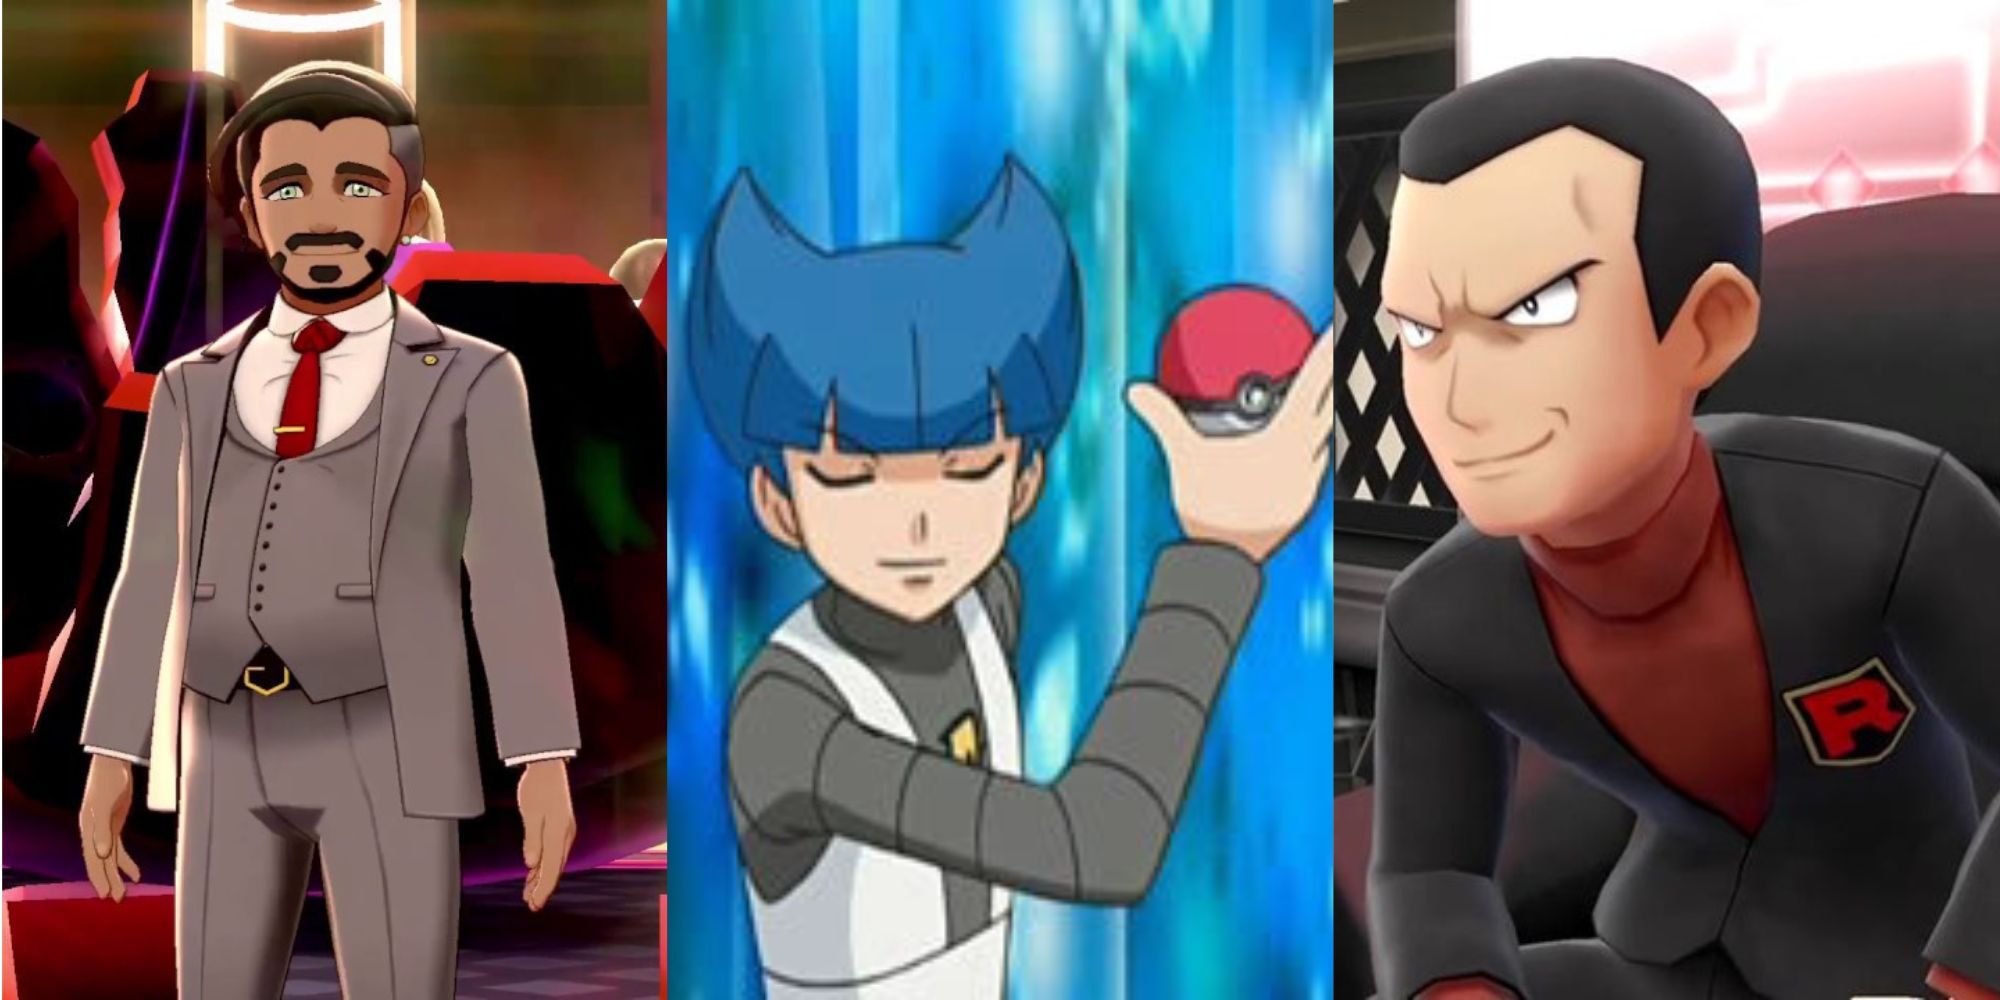 Chairman Rose from Pokemon Sword and Shield, Saturn from Pokemon Diamond and Pearl, Giovanni from Pokemon Let's Go Pikachu and Eevee